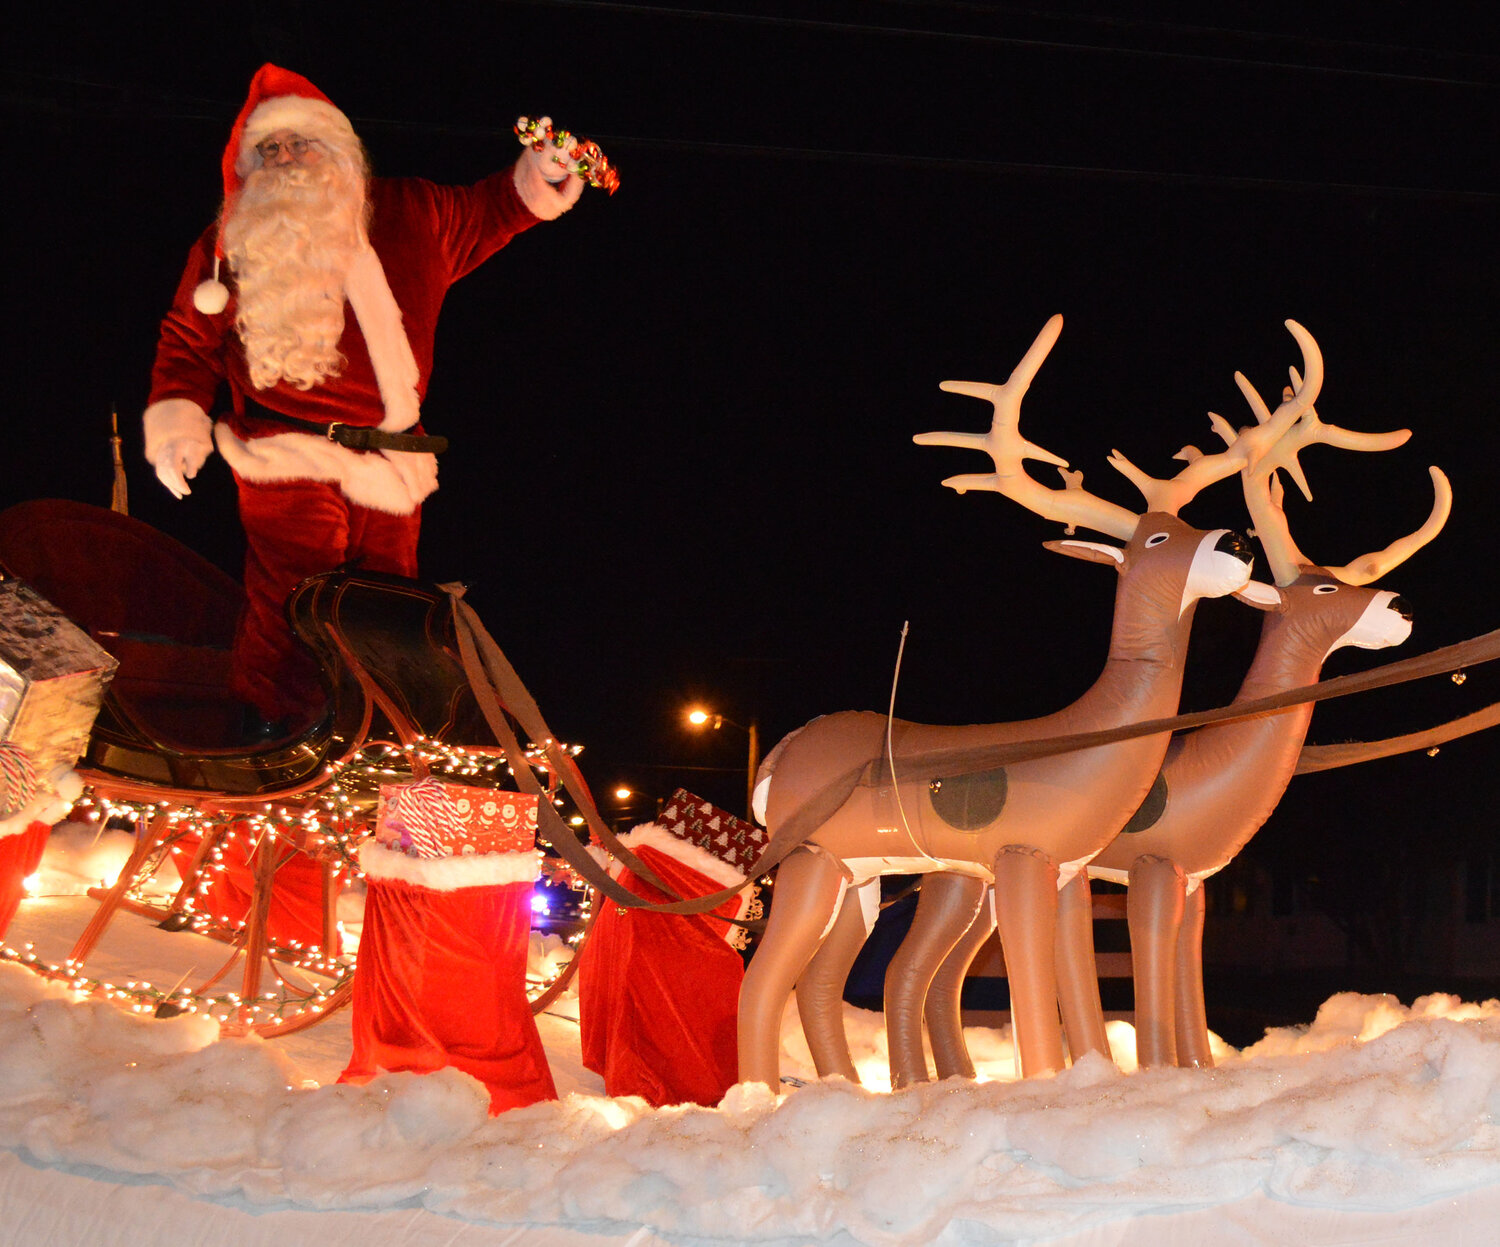 Santa Claus arrives on a float provided by Boy Scout Troop 95 at the end of the Georgetown Christmas Parade on Thursday.